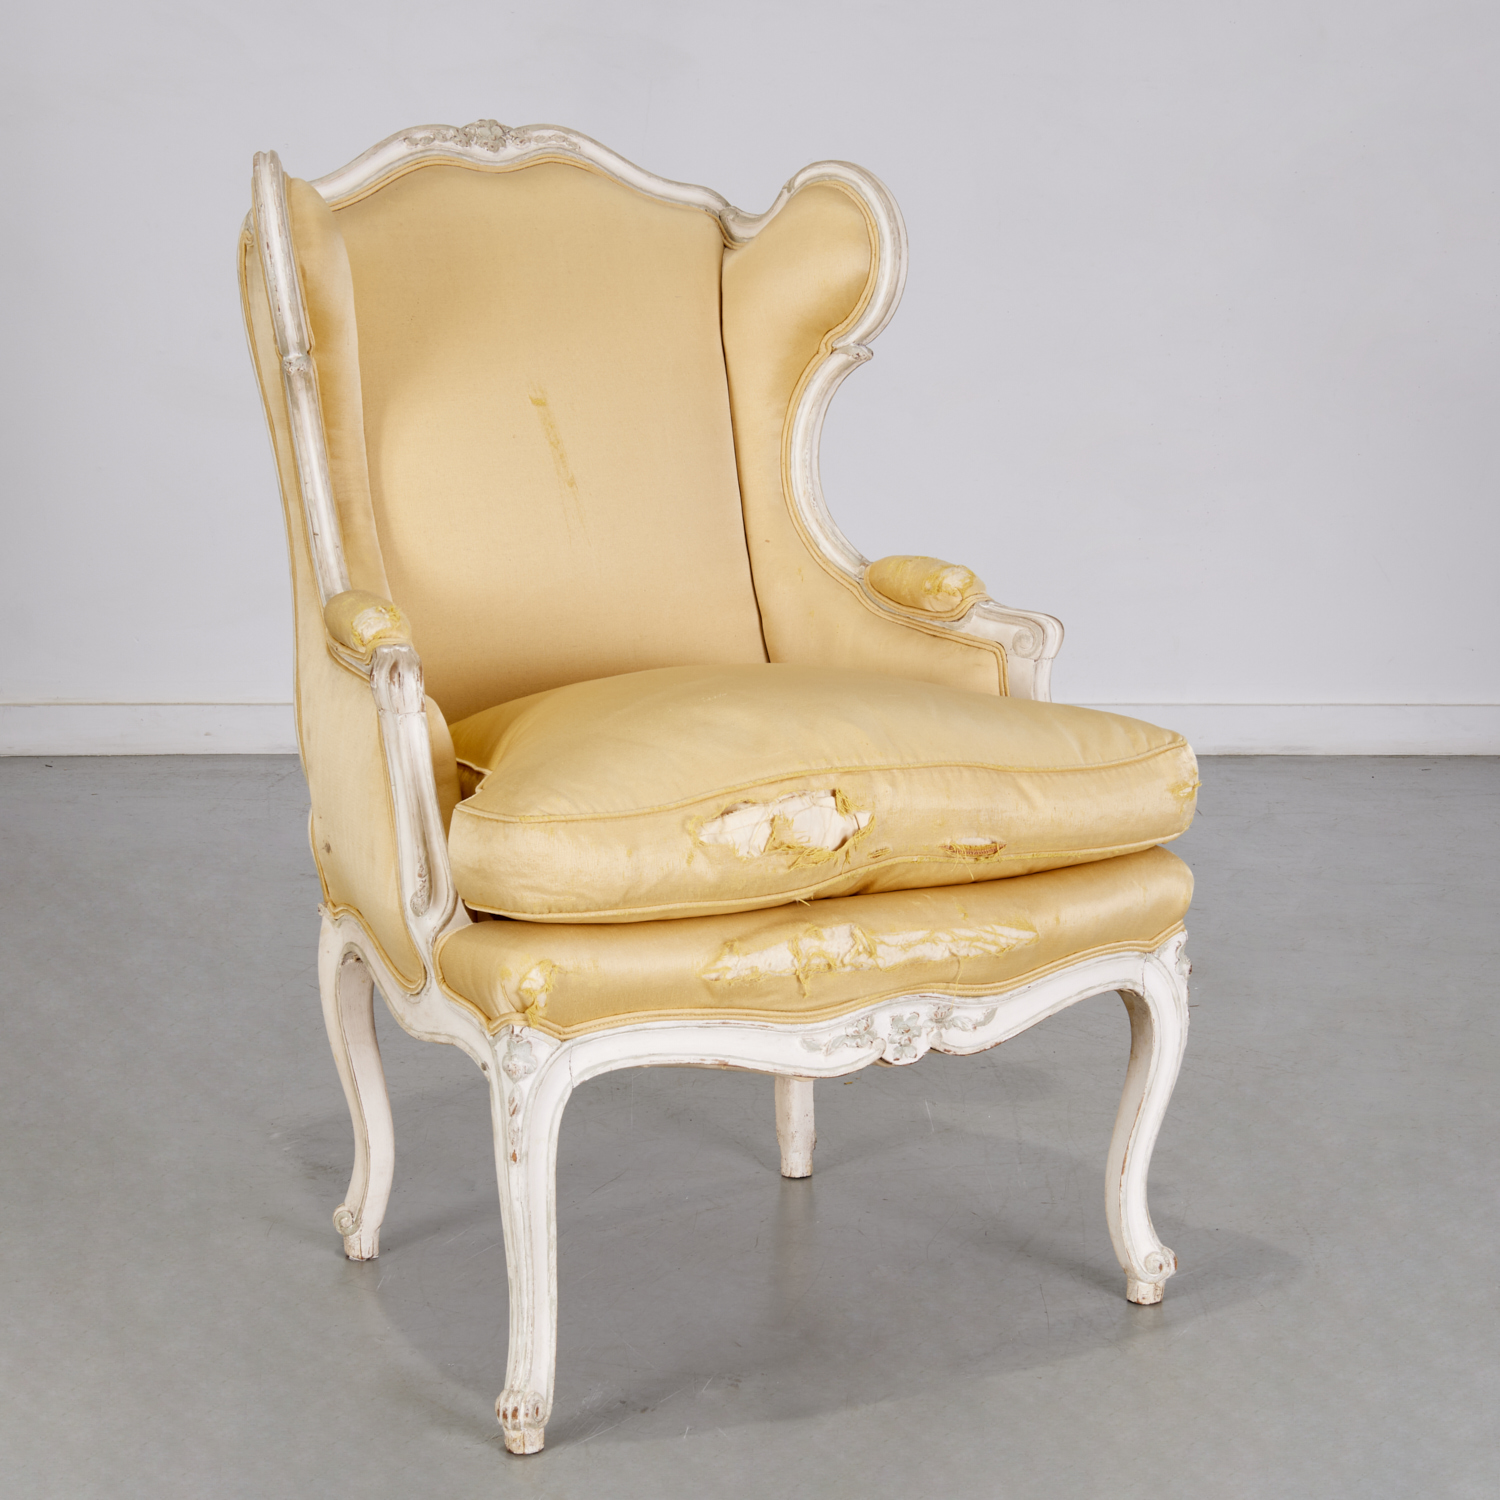 LOUIS XV STYLE PAINTED WING BACK